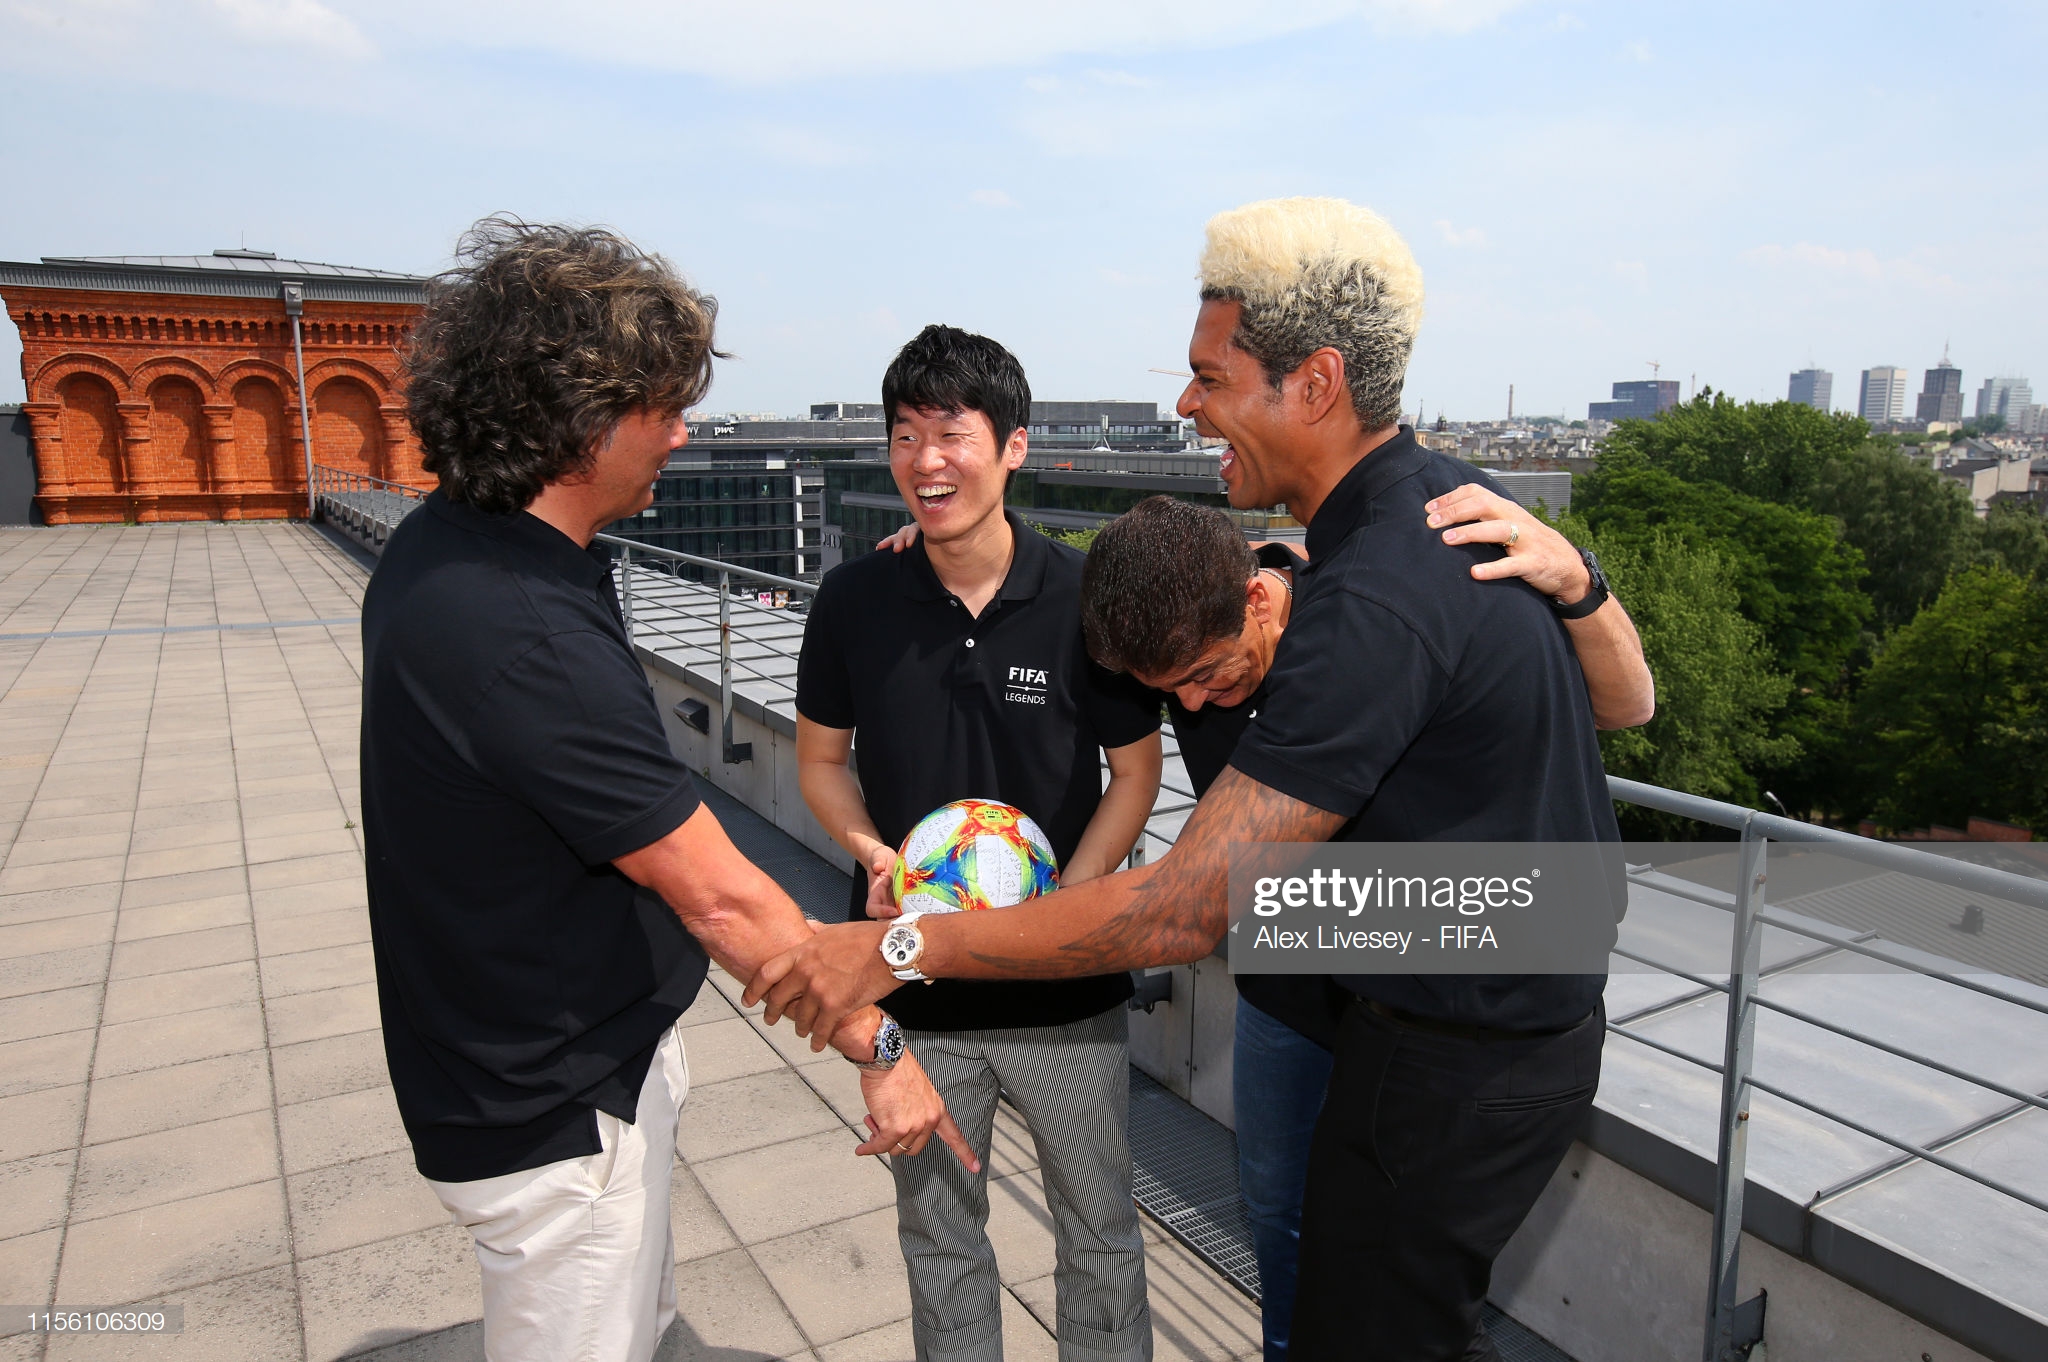 gettyimages-1156106309-2048x2048.jpg